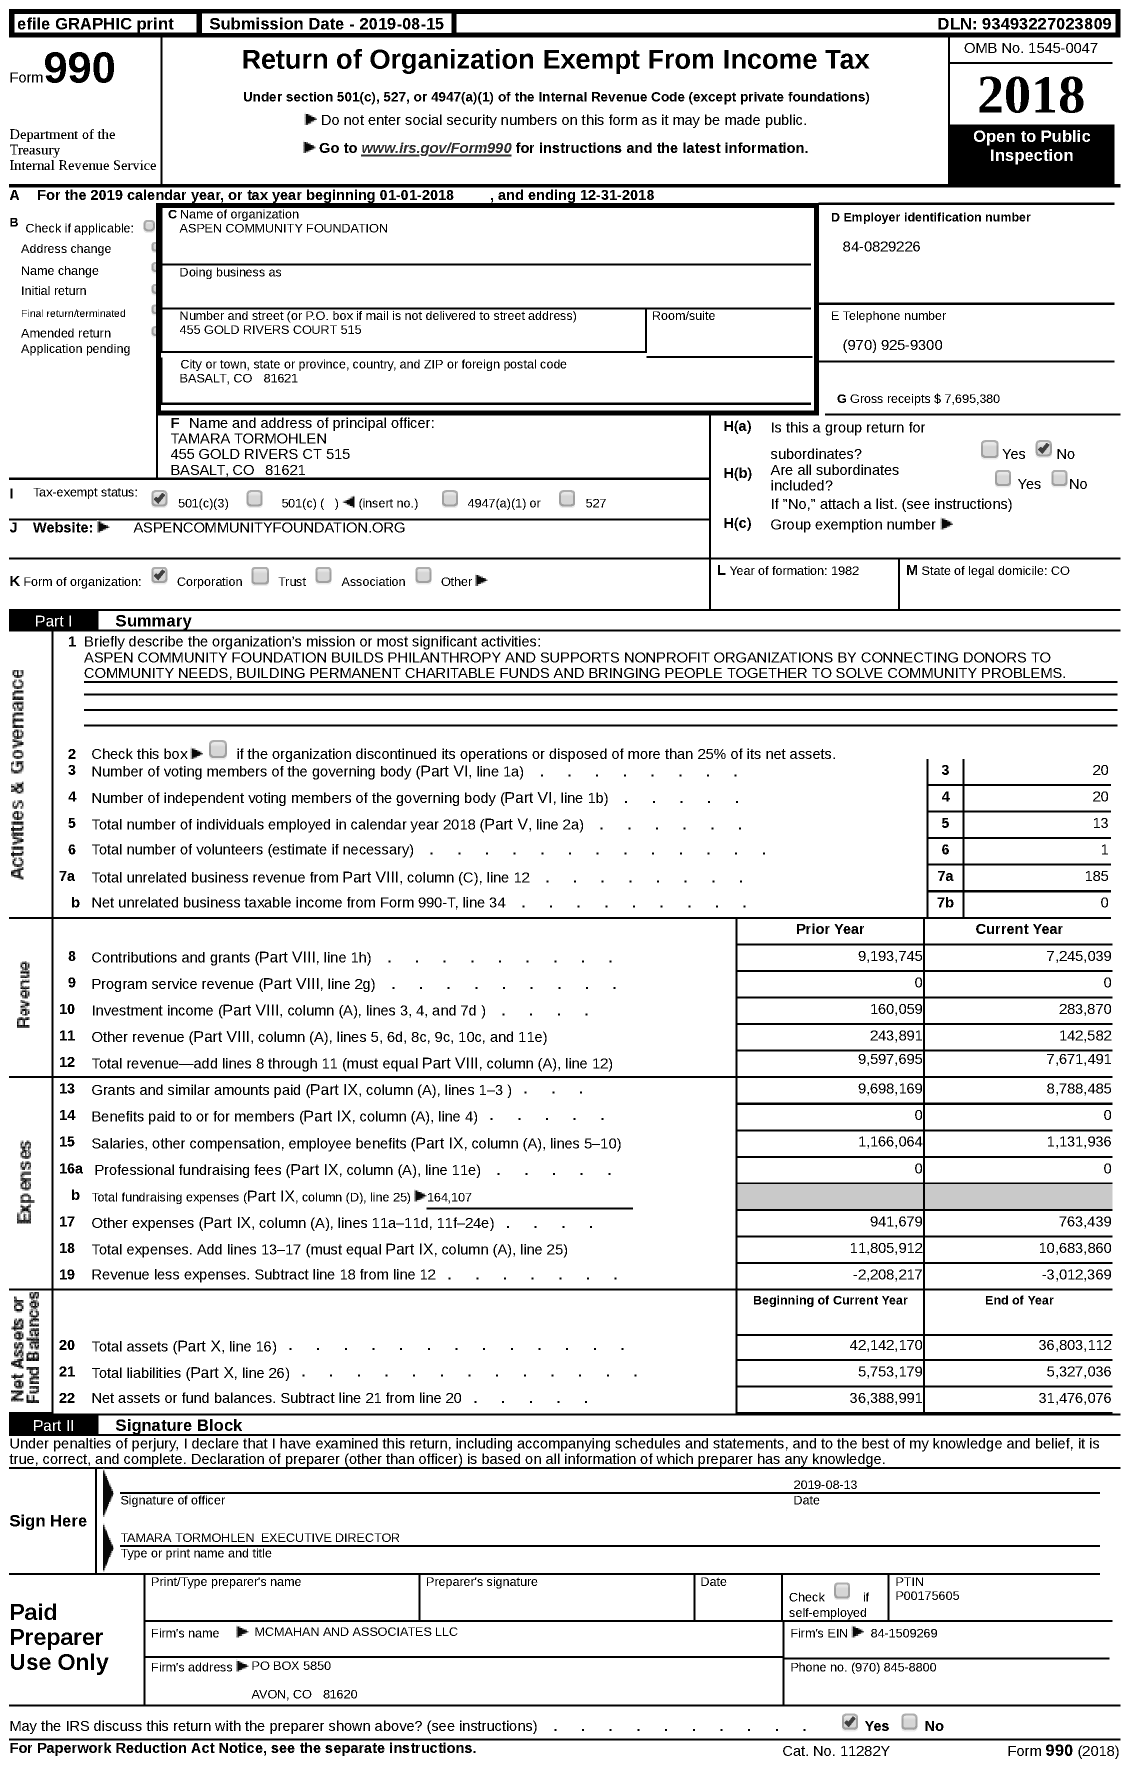 Image of first page of 2018 Form 990 for Aspen Community Foundation (ACF)